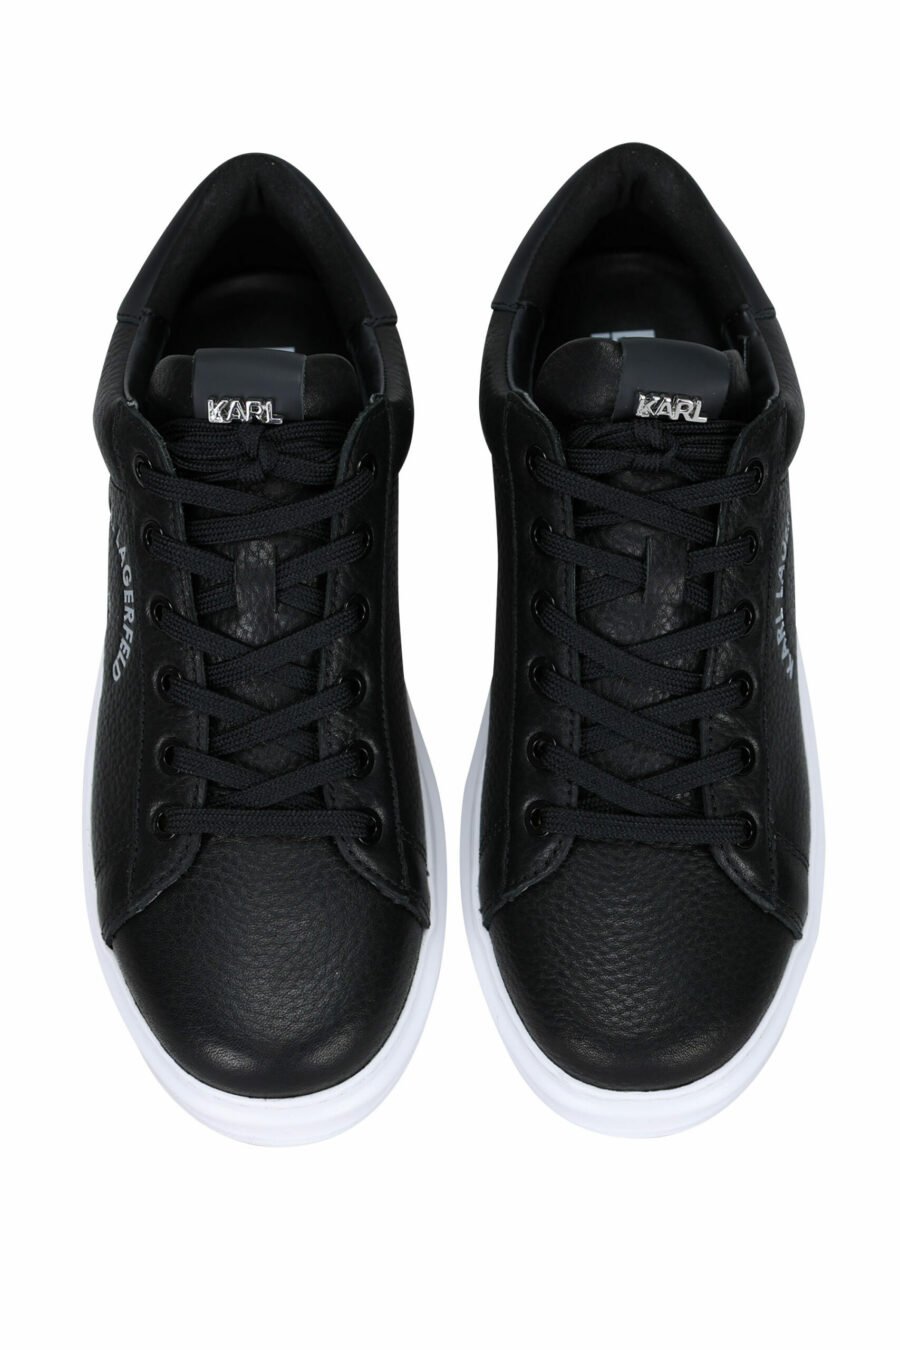 Black "kapri mens" textured trainers with white "rue st guillaume" logo - 5059529323782 4 scaled